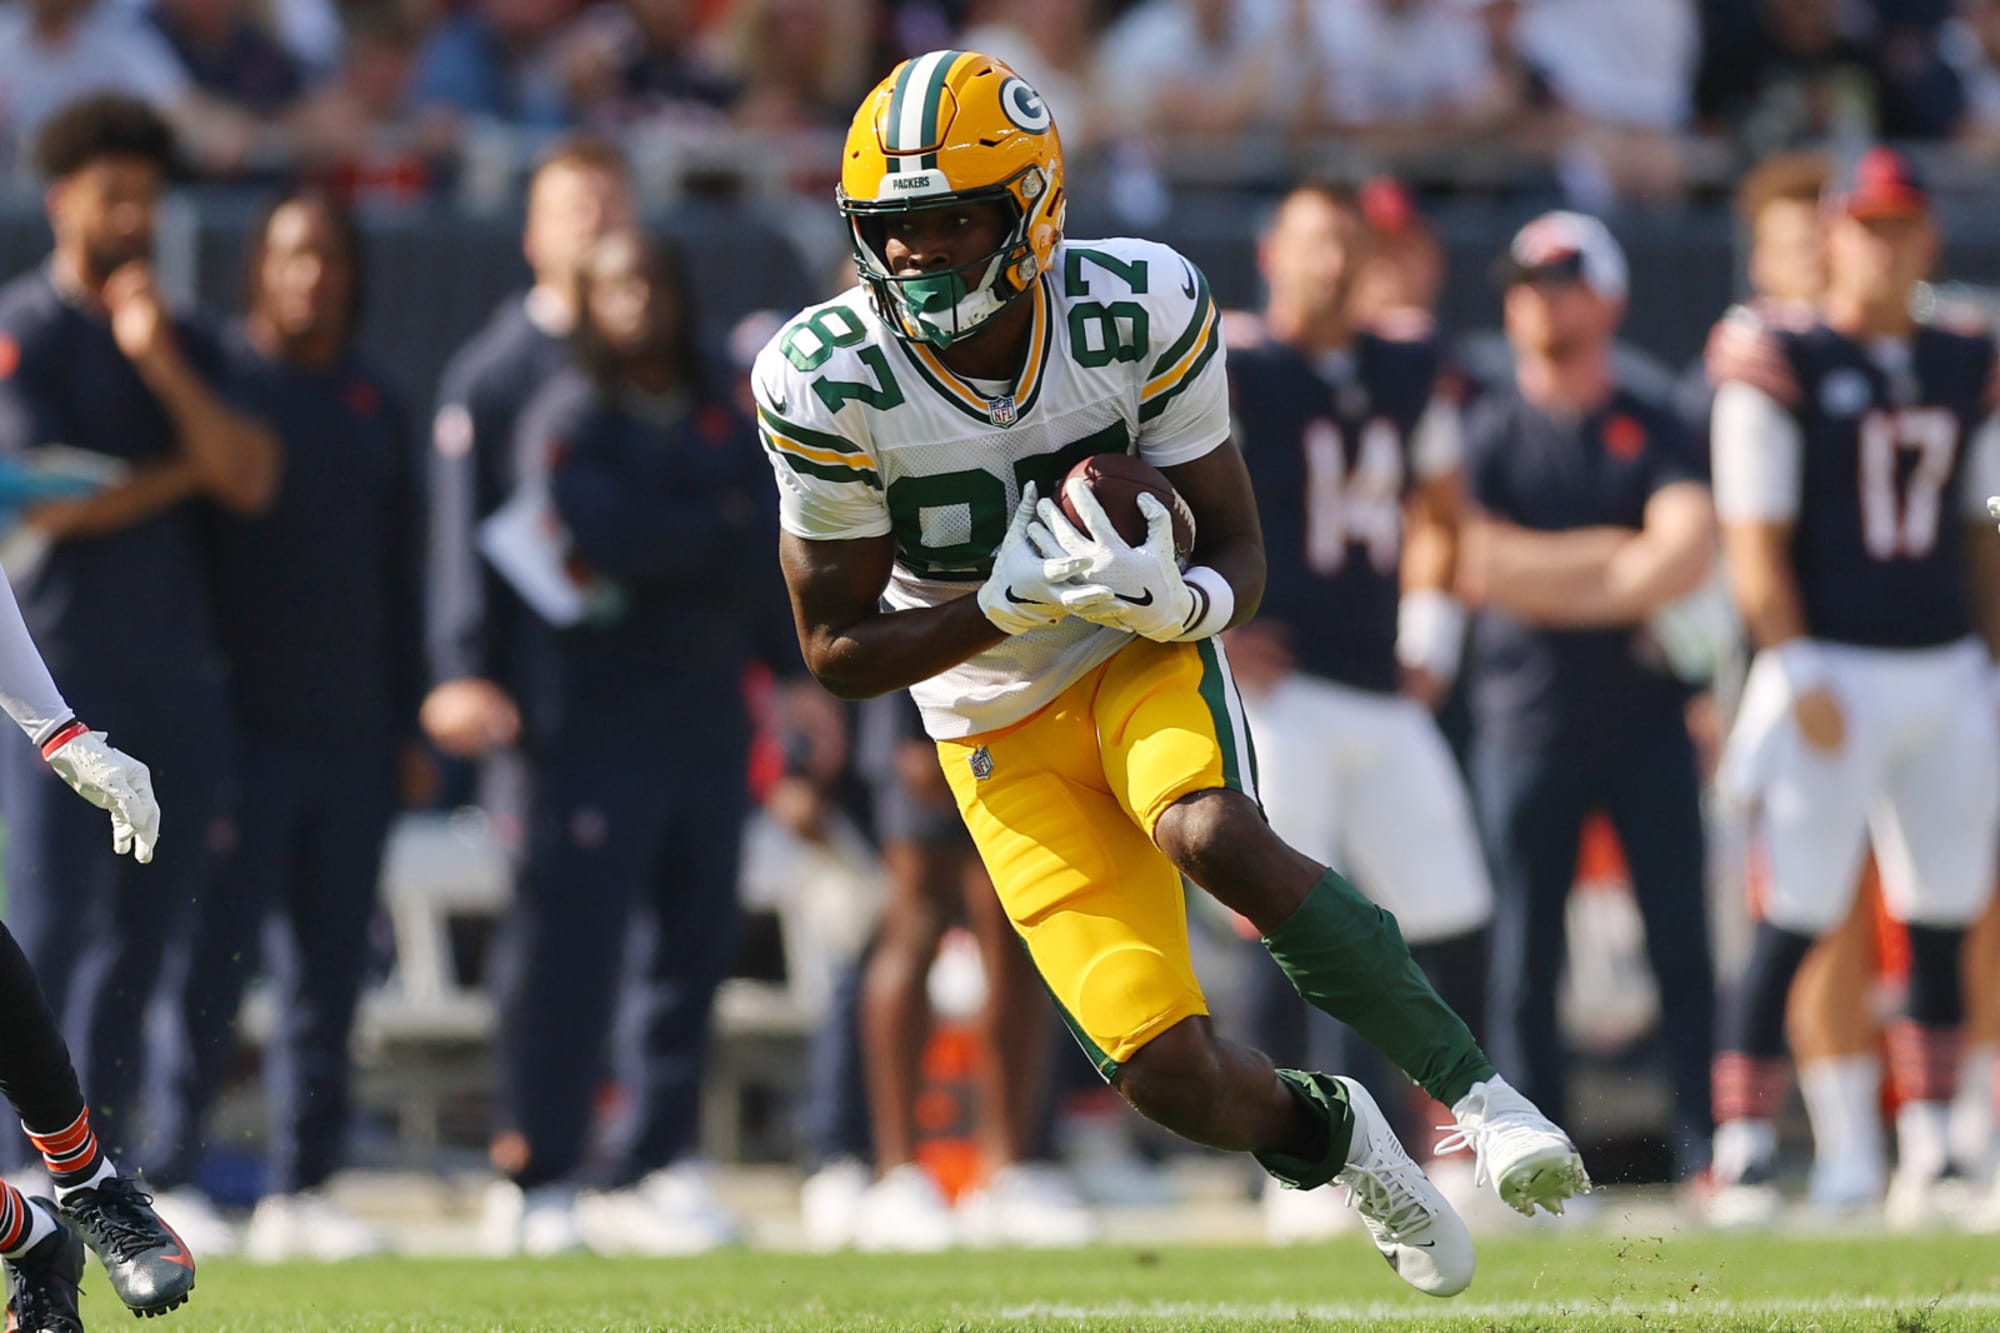 4 Key things to watch for and final thoughts on Packers vs. Saints